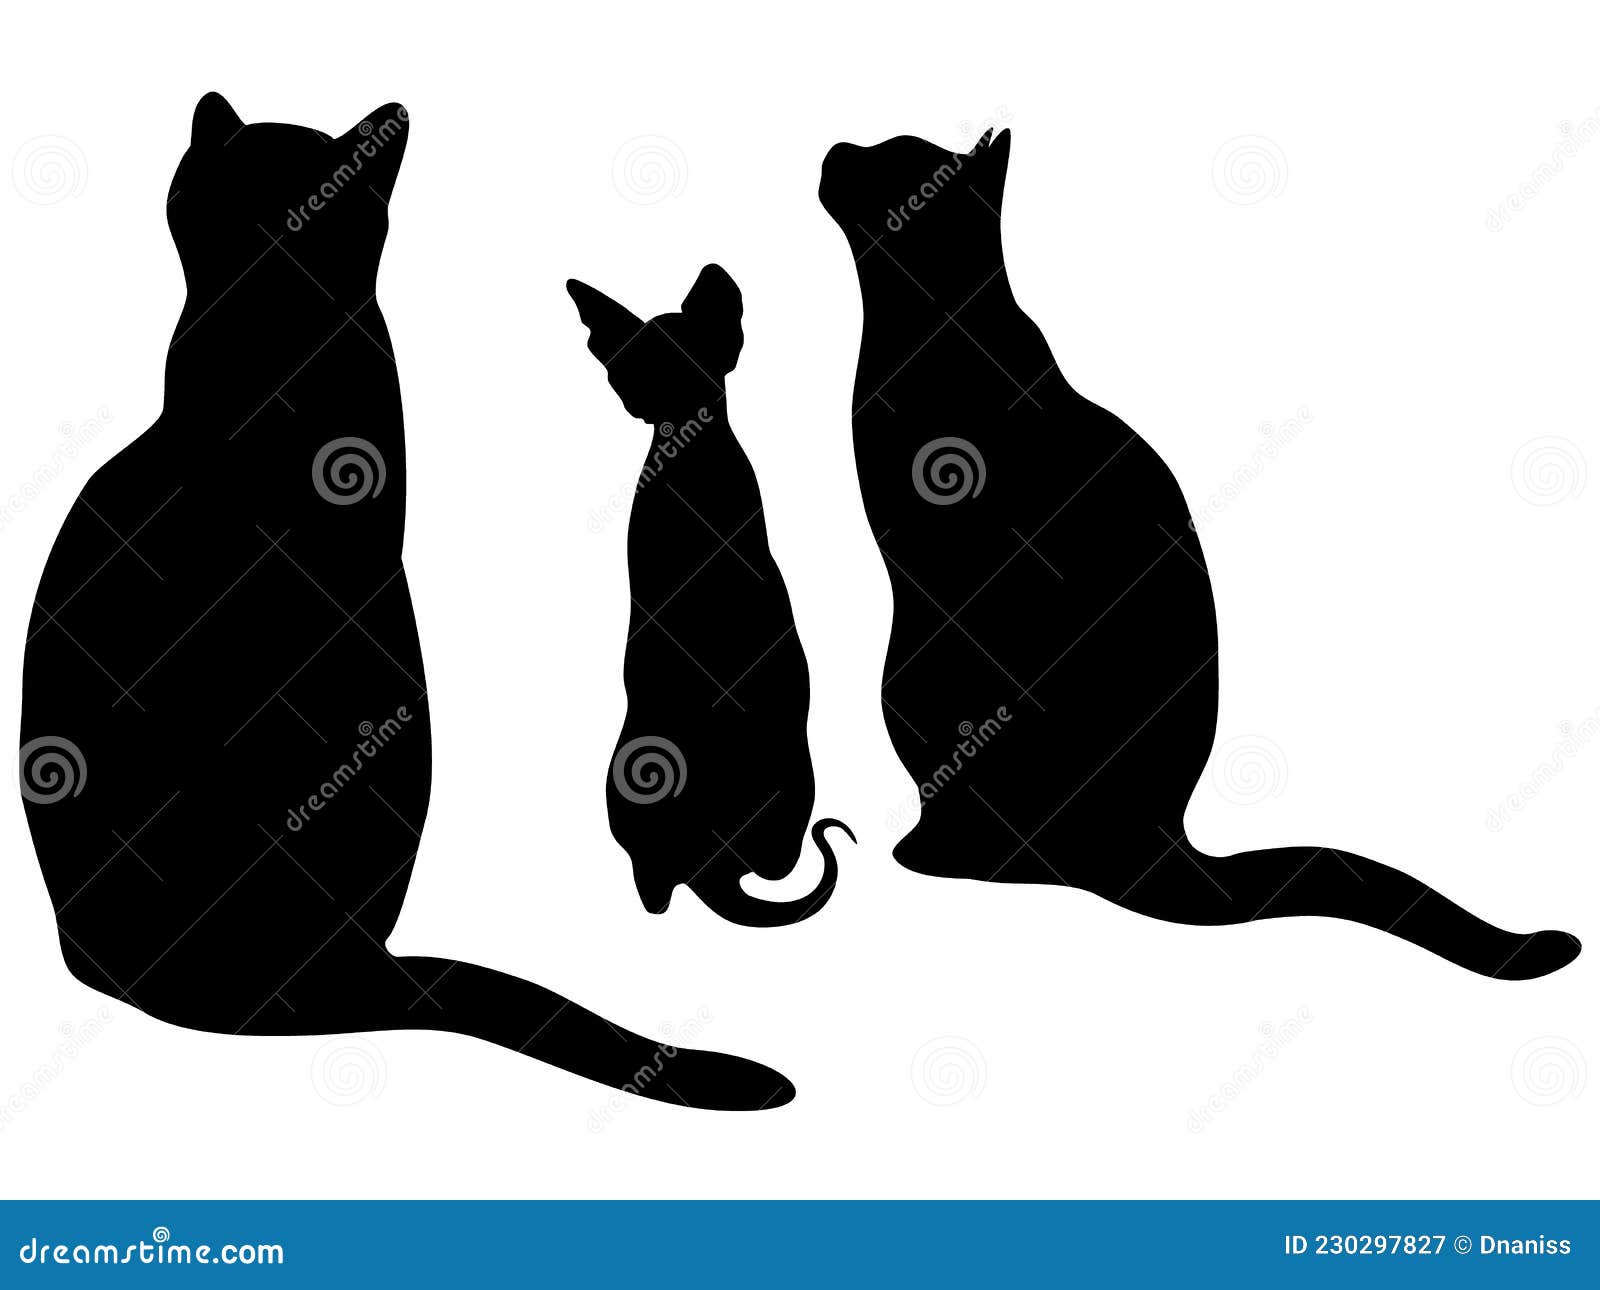 Vector icon black cat sitting. Silhouette of a cat isolated on a